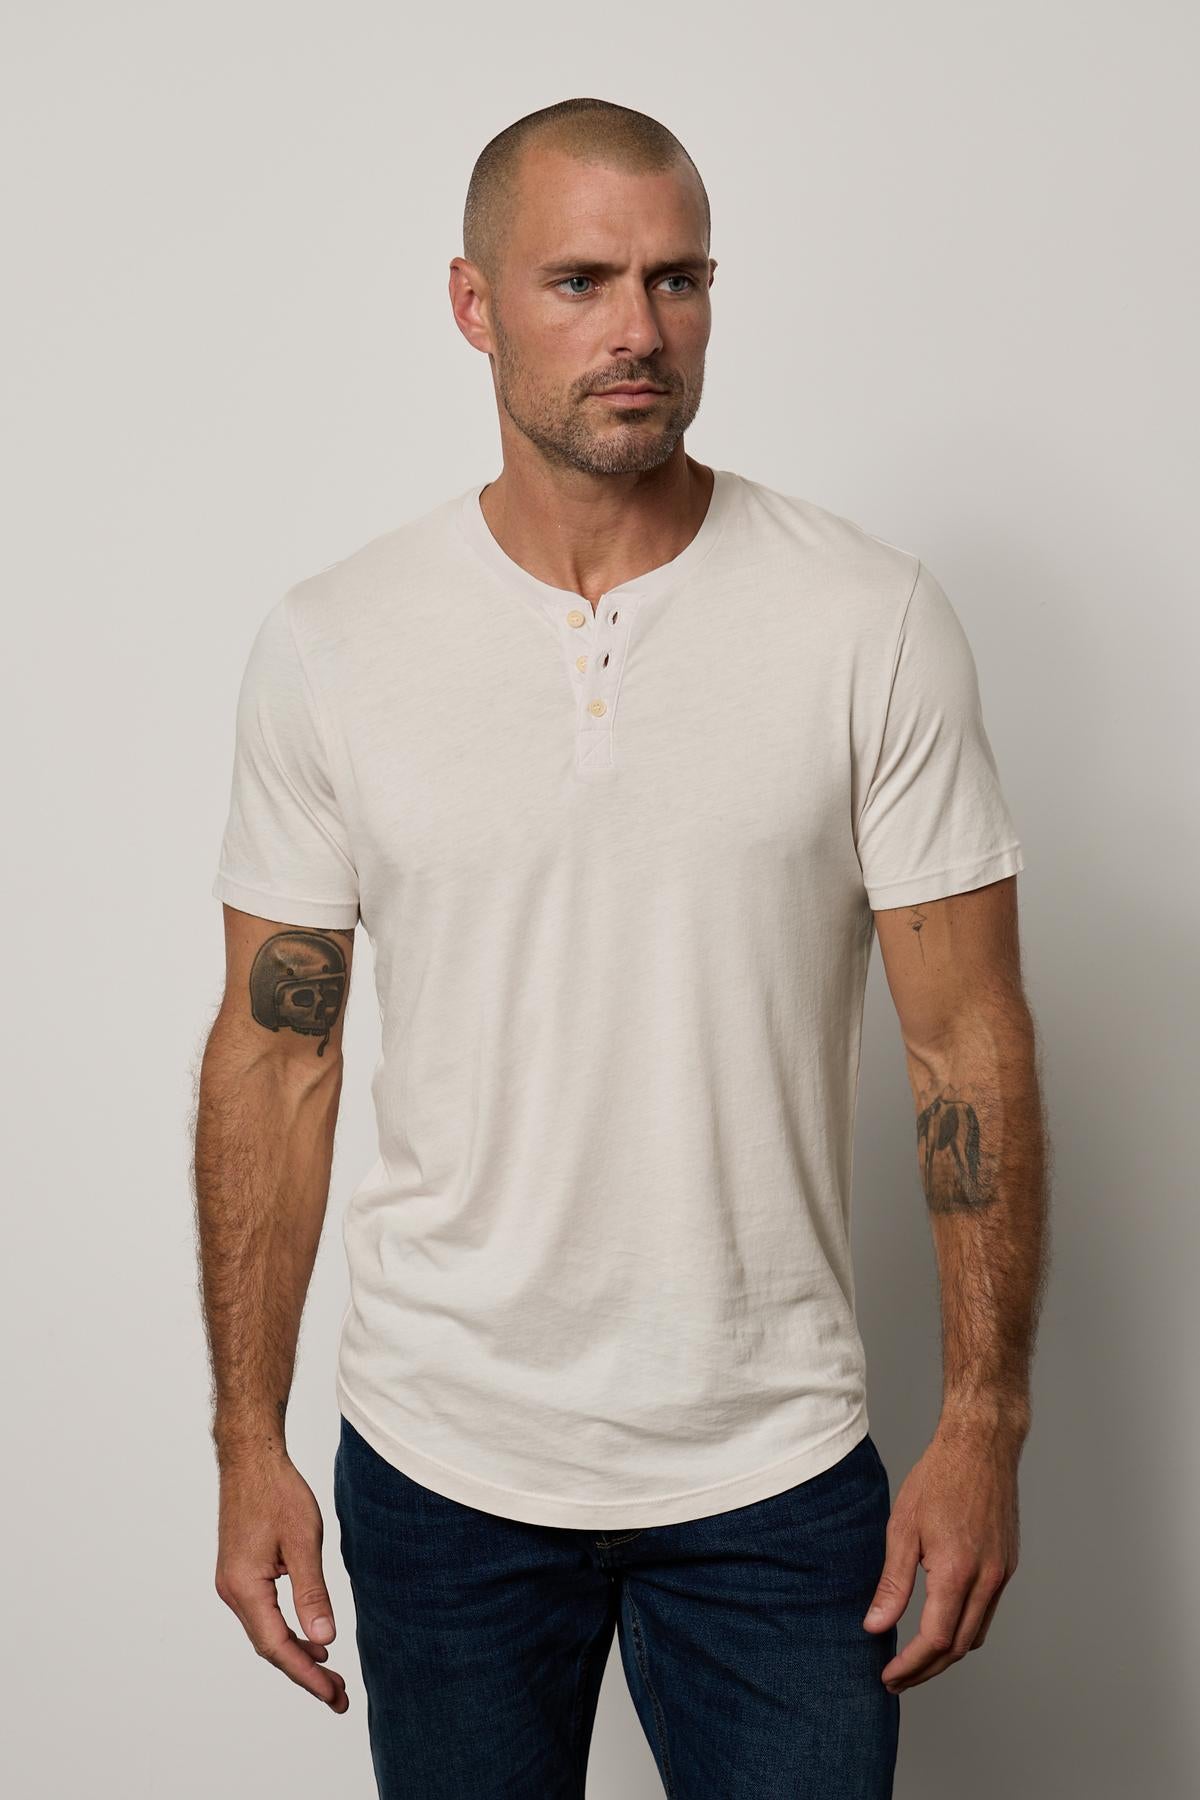 A bald man with tattoos on both arms, wearing a white Velvet by Graham & Spencer Fulton Henley with a curved hemline, standing against a neutral background.-36890721943745